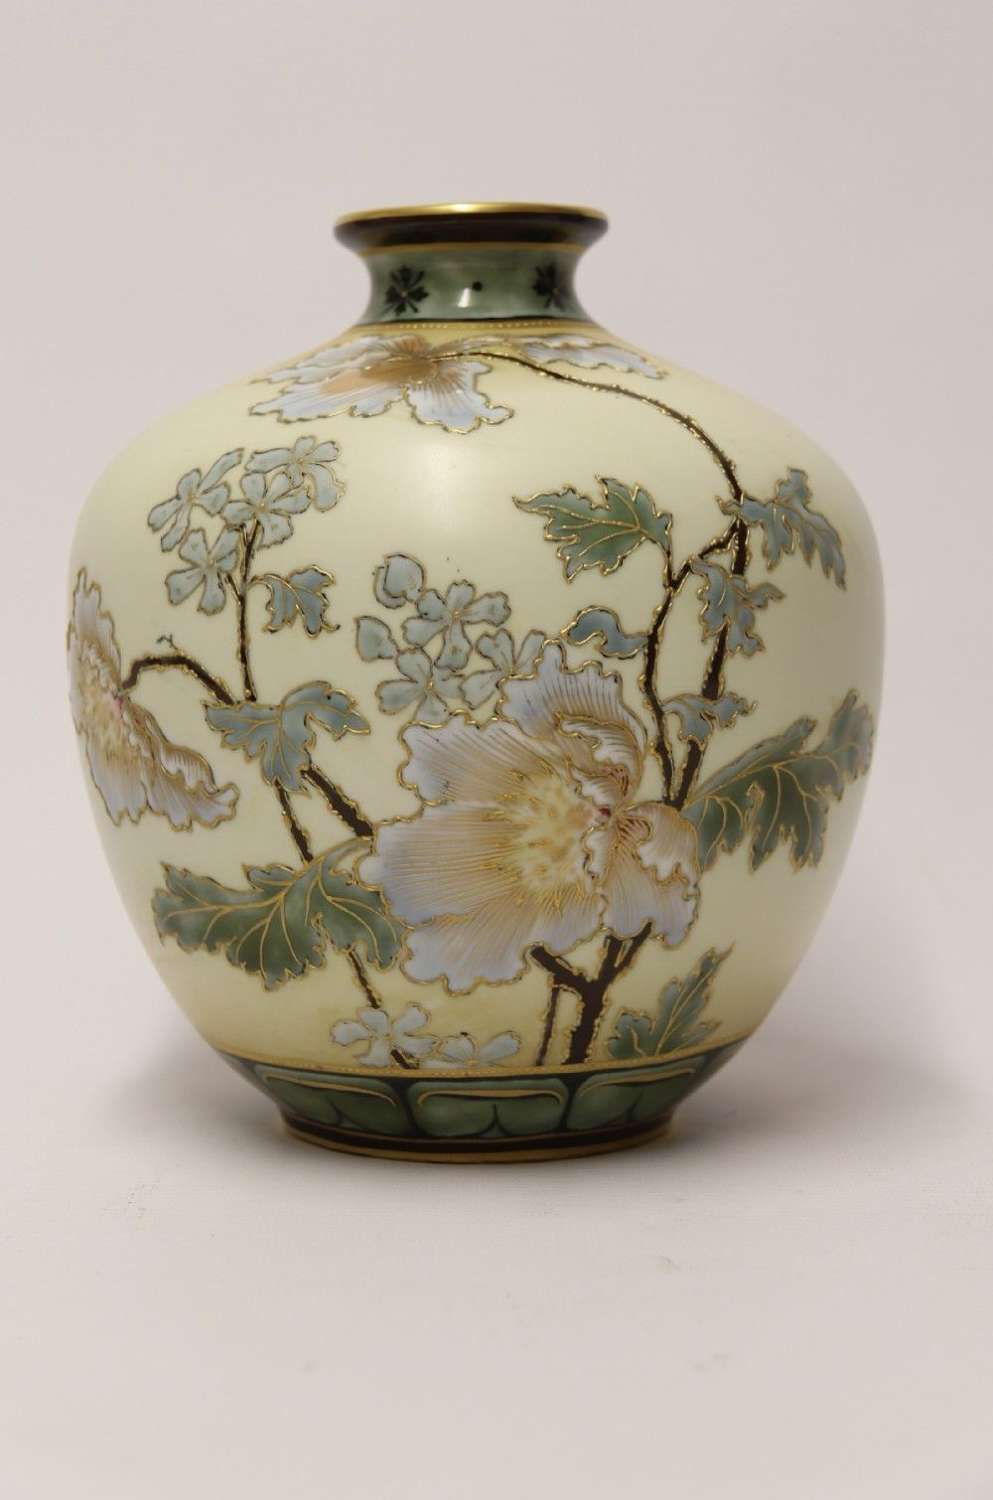 A Superb Large Early 20th Century Porcelain Vase By Alexandra Porcelai